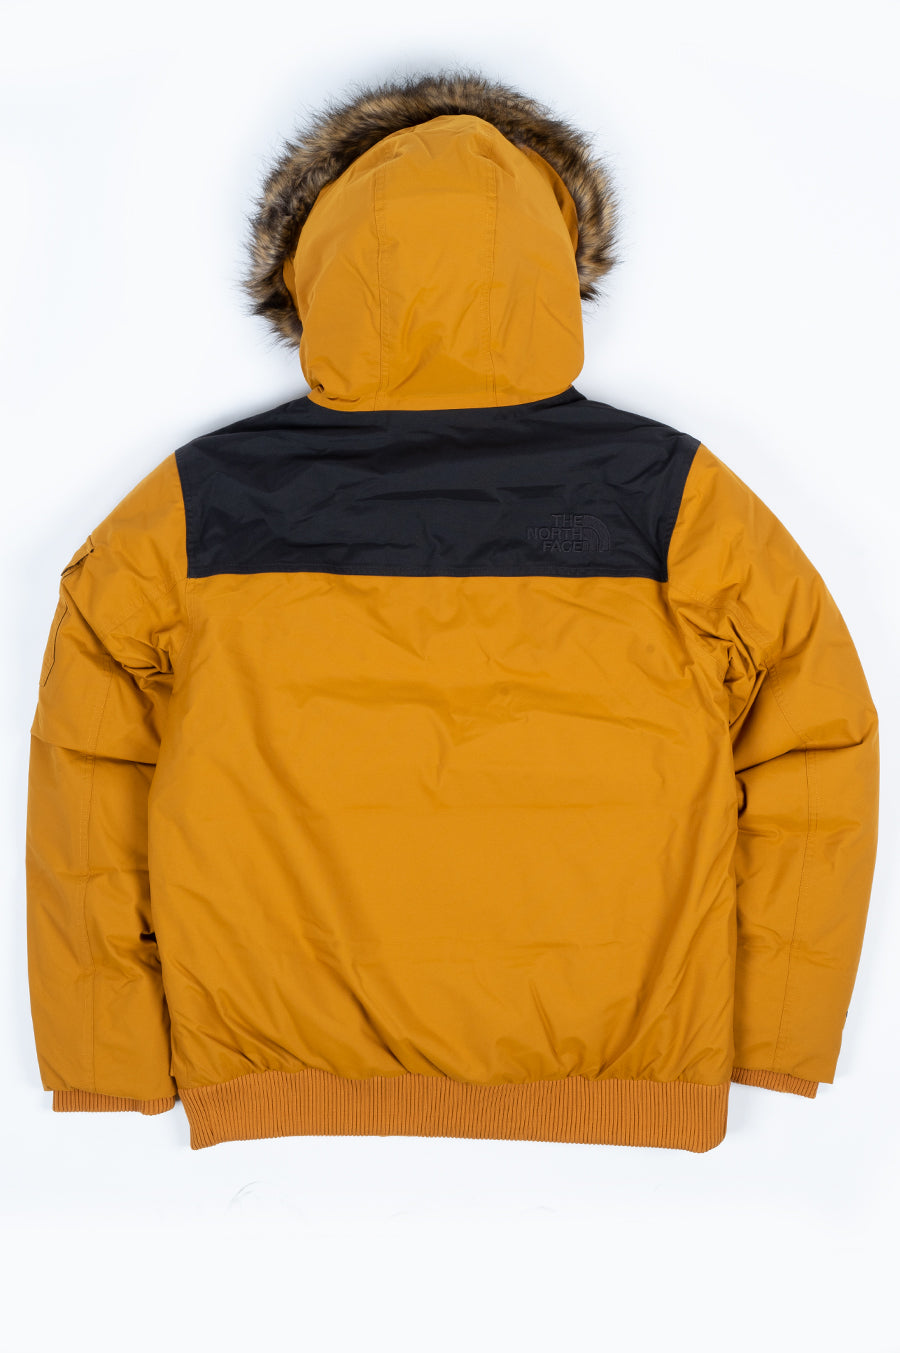 THE NORTH FACE GOTHAM JACKET III TIMBER TAN